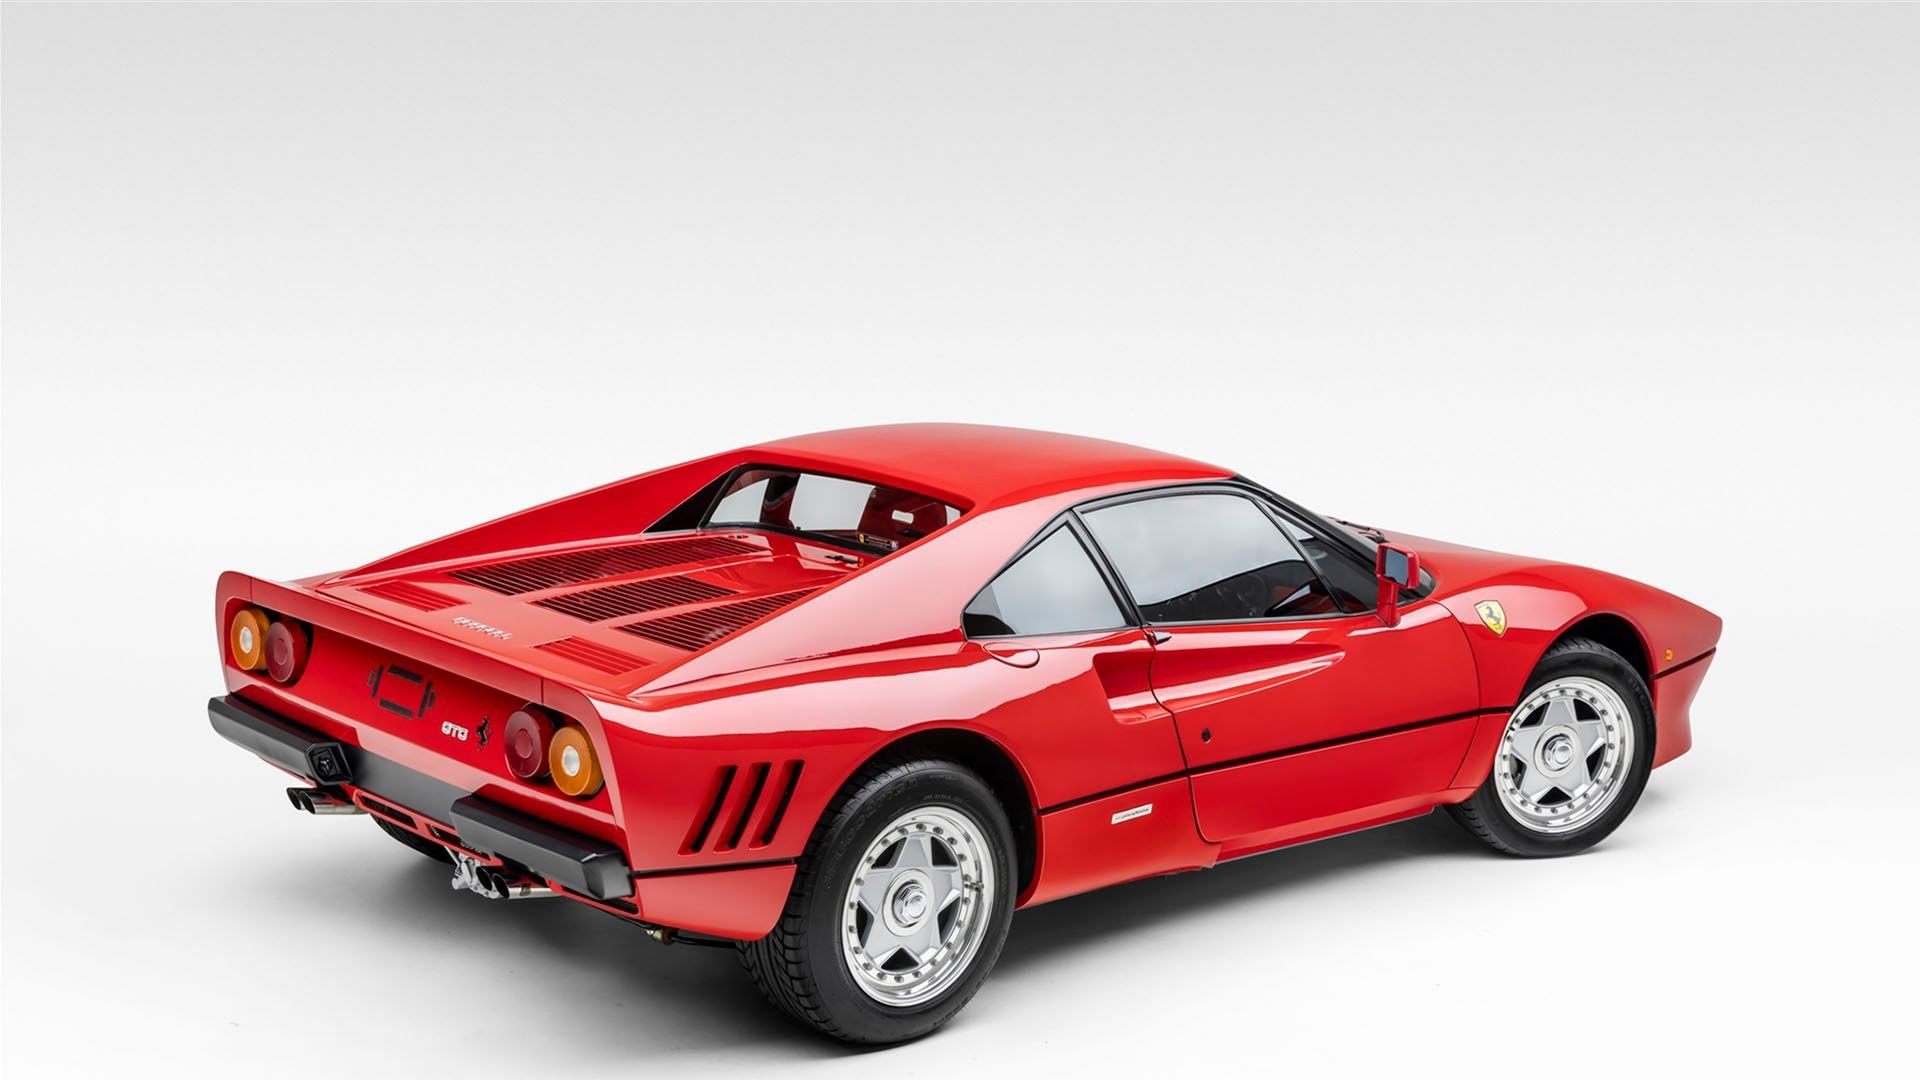 handpicked, sports, american, news, highlights, newsletter, muscle, client, classic, modern classic, europe, features, luxury, trucks, celebrity, off-road, german, broad arrow auctions is selling a ferrari 288 gto at no reserve